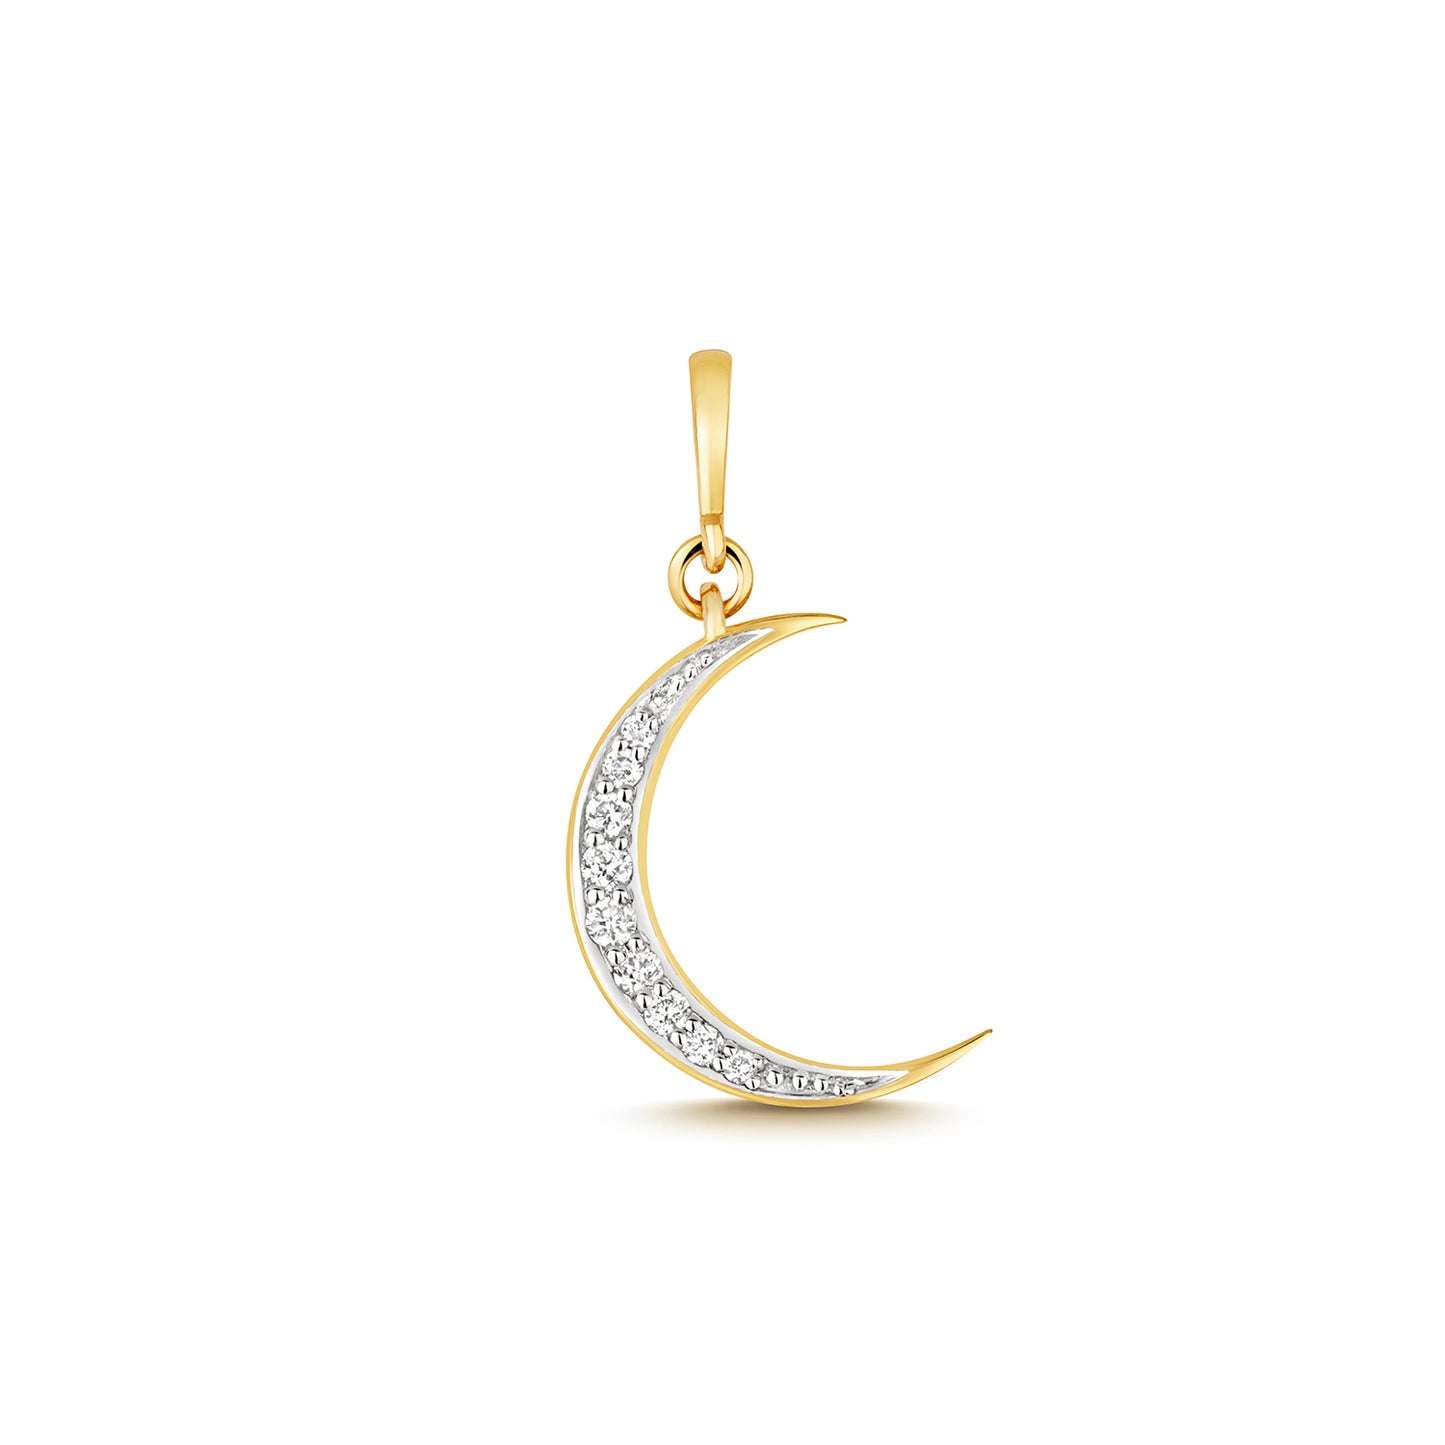 Fairytale Crescent Moon Pendant, Pave Set with Diamonds in 9ct Gold